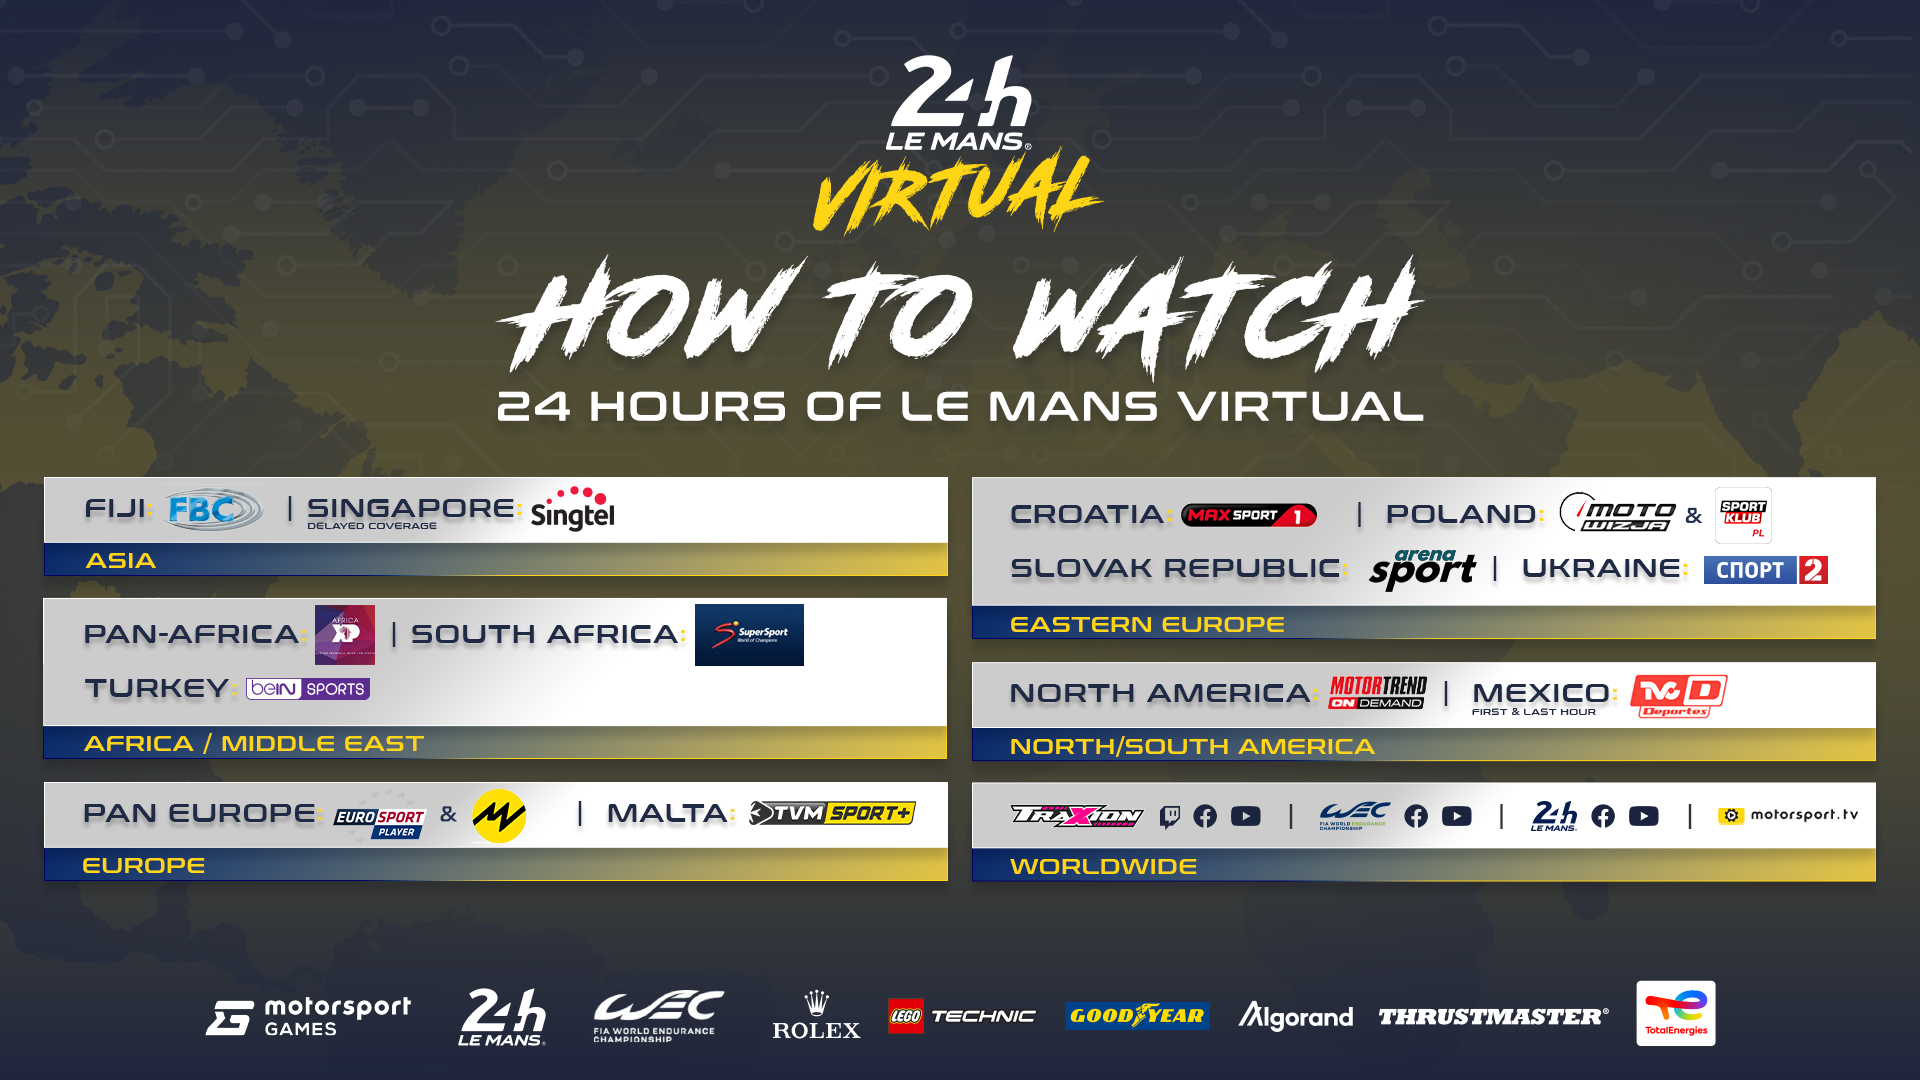 How to watch the 24 hours of Le Mans Virtual.